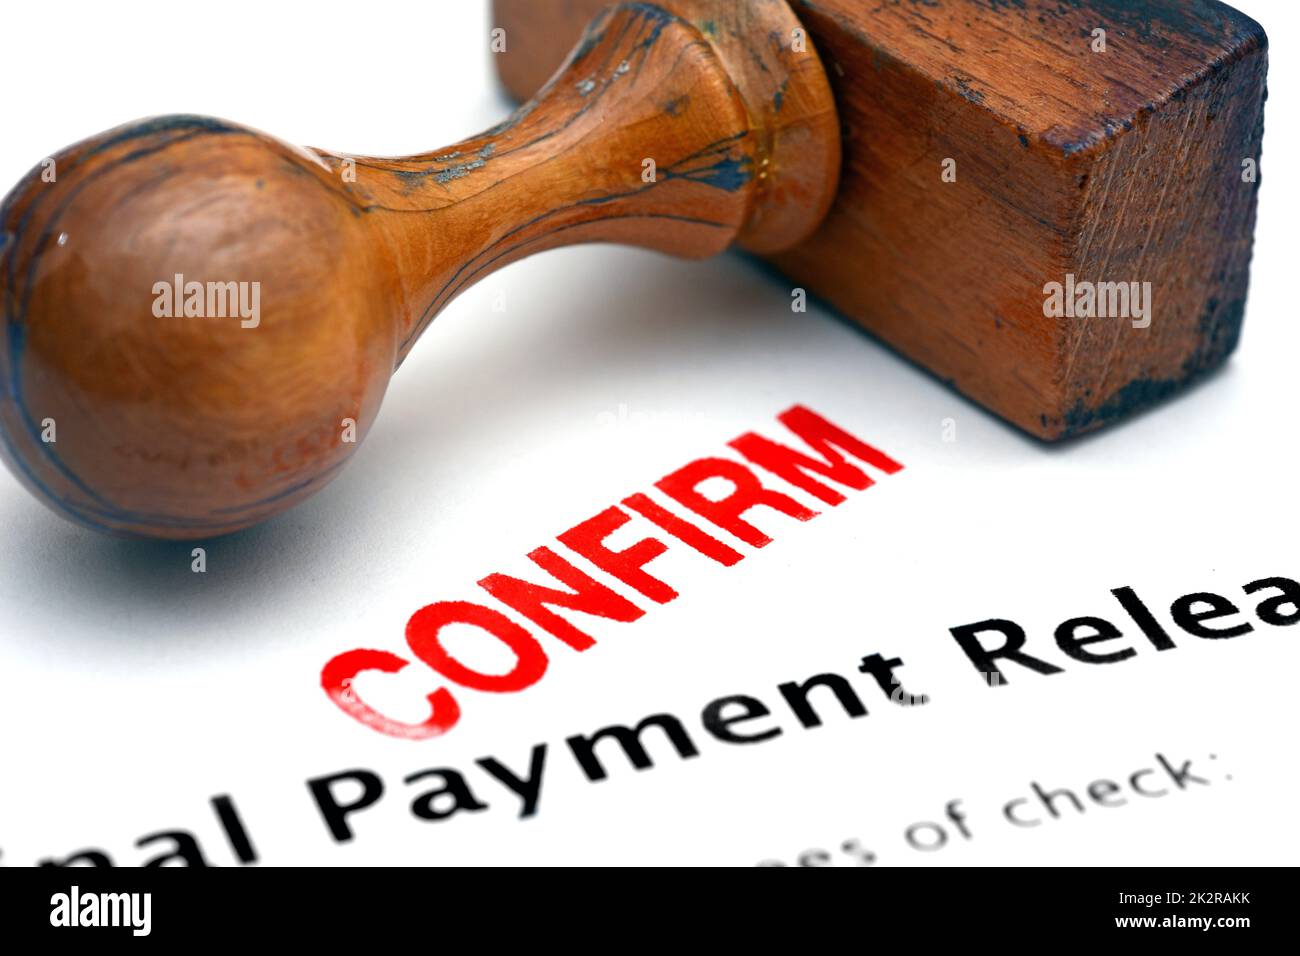 Payment form - confirm Stock Photo